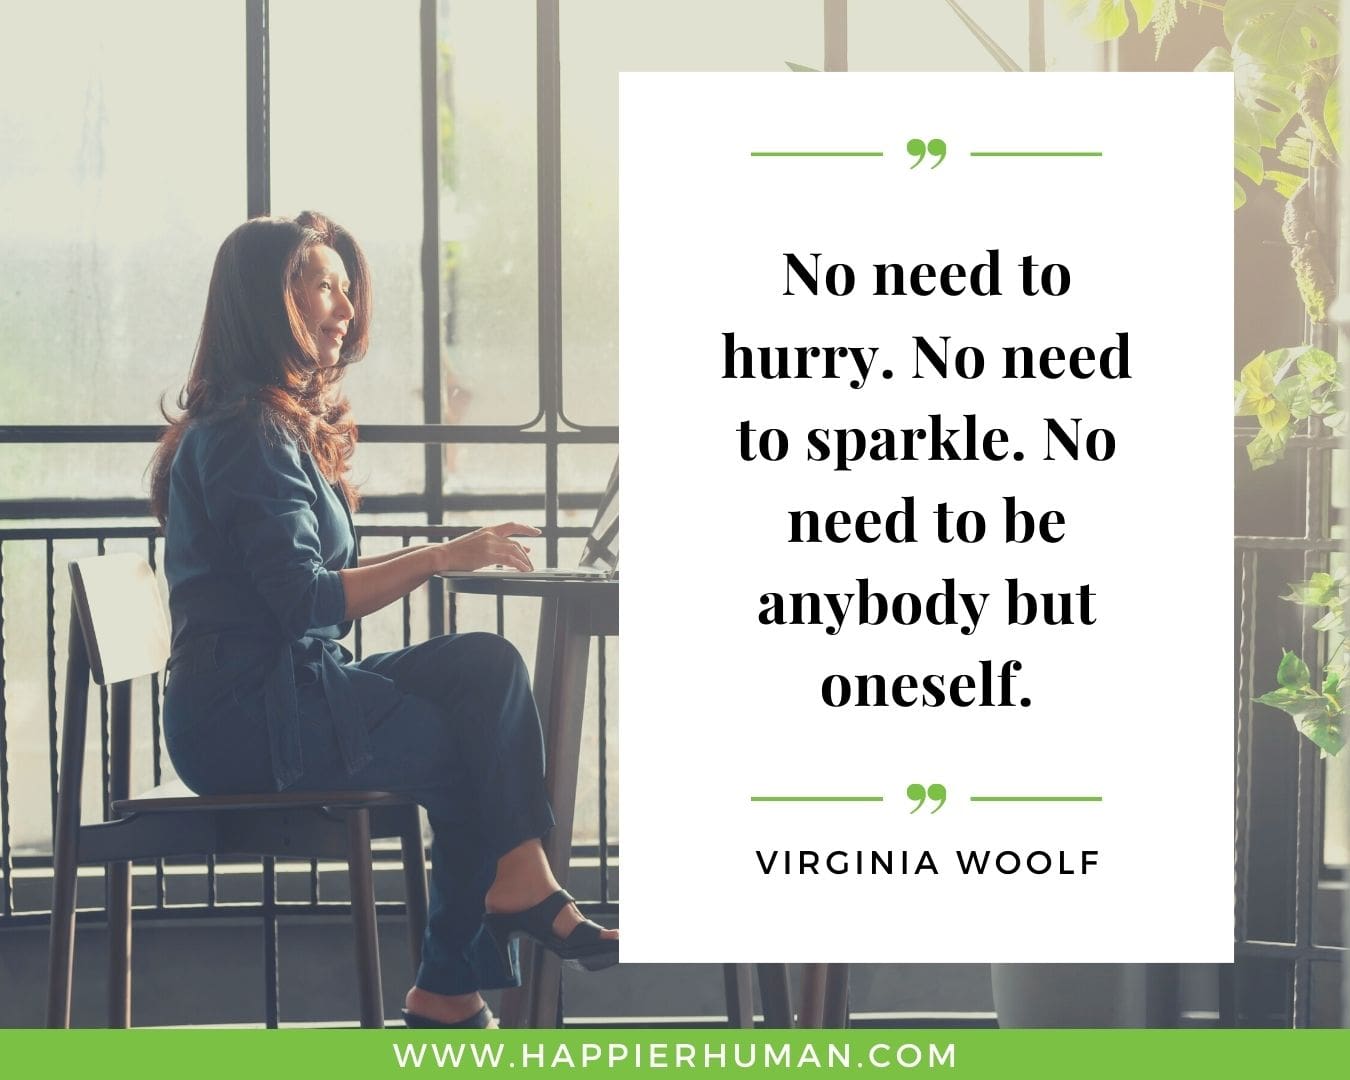 Introvert Quotes - “No need to hurry. No need to sparkle. No need to be anybody but oneself.” – Virginia Woolf